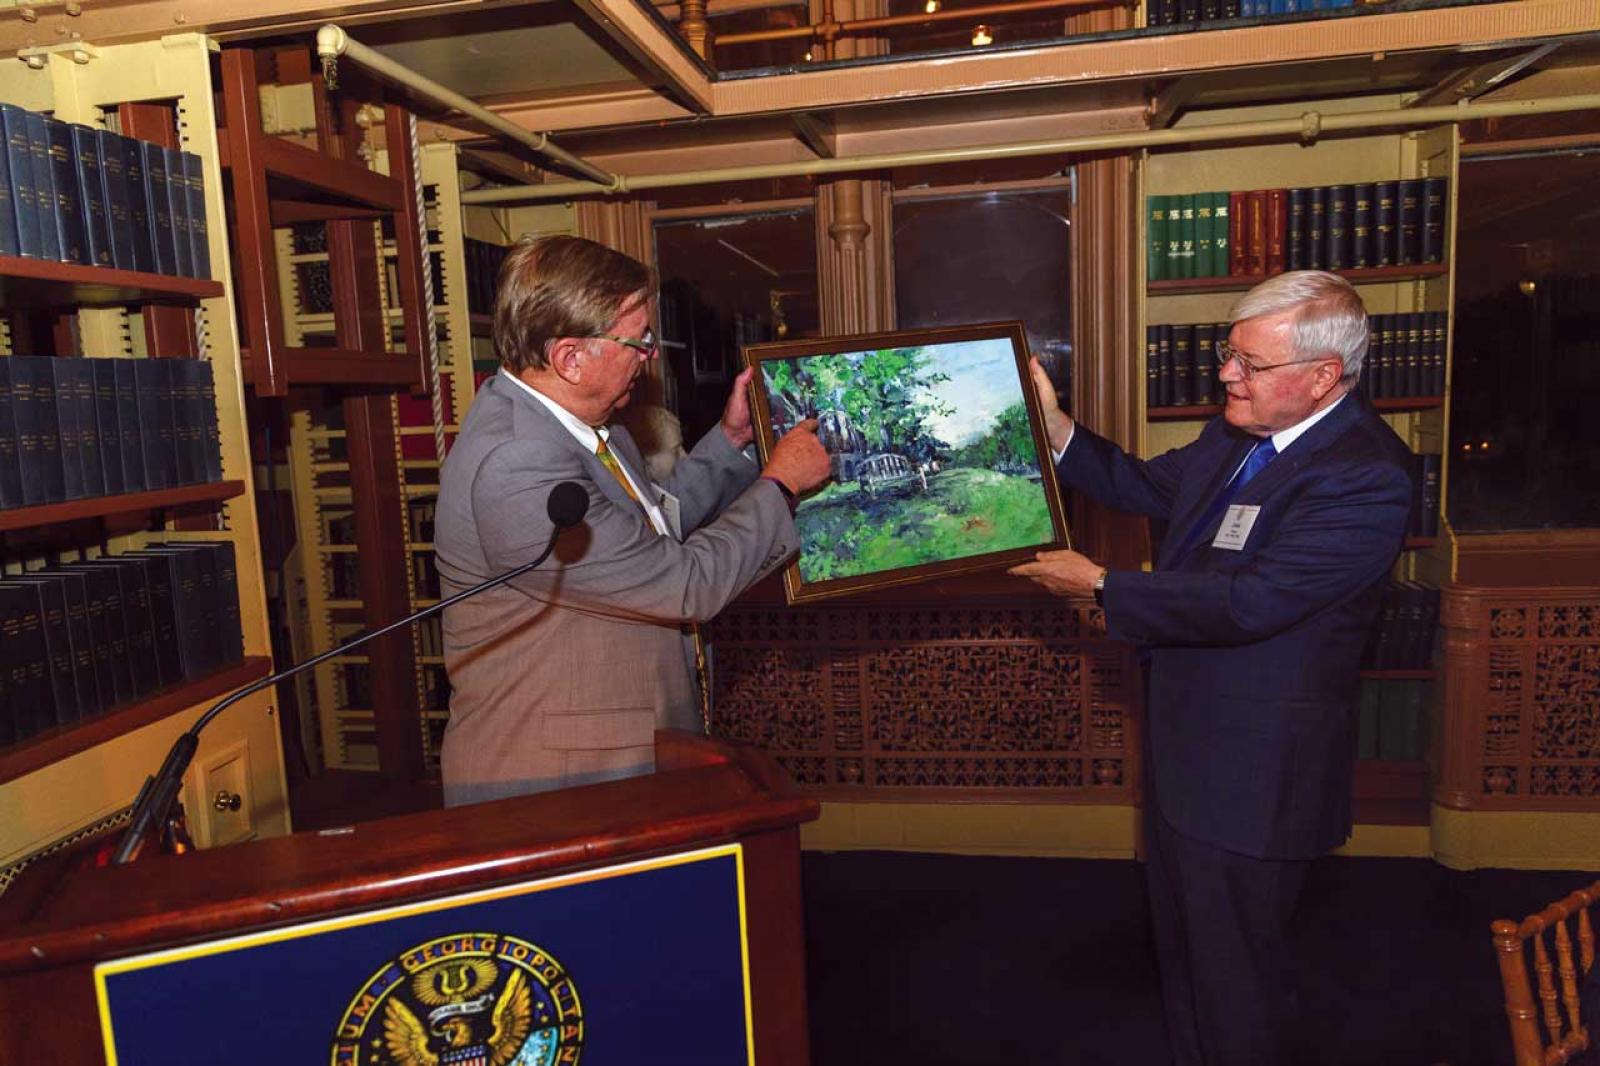 At a September 2018 event in Riggs Library, the family, friends, and colleagues of Charles A. Read, M.D., celebrated his investiture as the inaugural recipient of the Allan J. Goody, M.D., Endowed Professorship in Medical Education. The painting shows Dr. Goody’s memorial bench and Yoshino cherry tree on the School of Medicine campus.